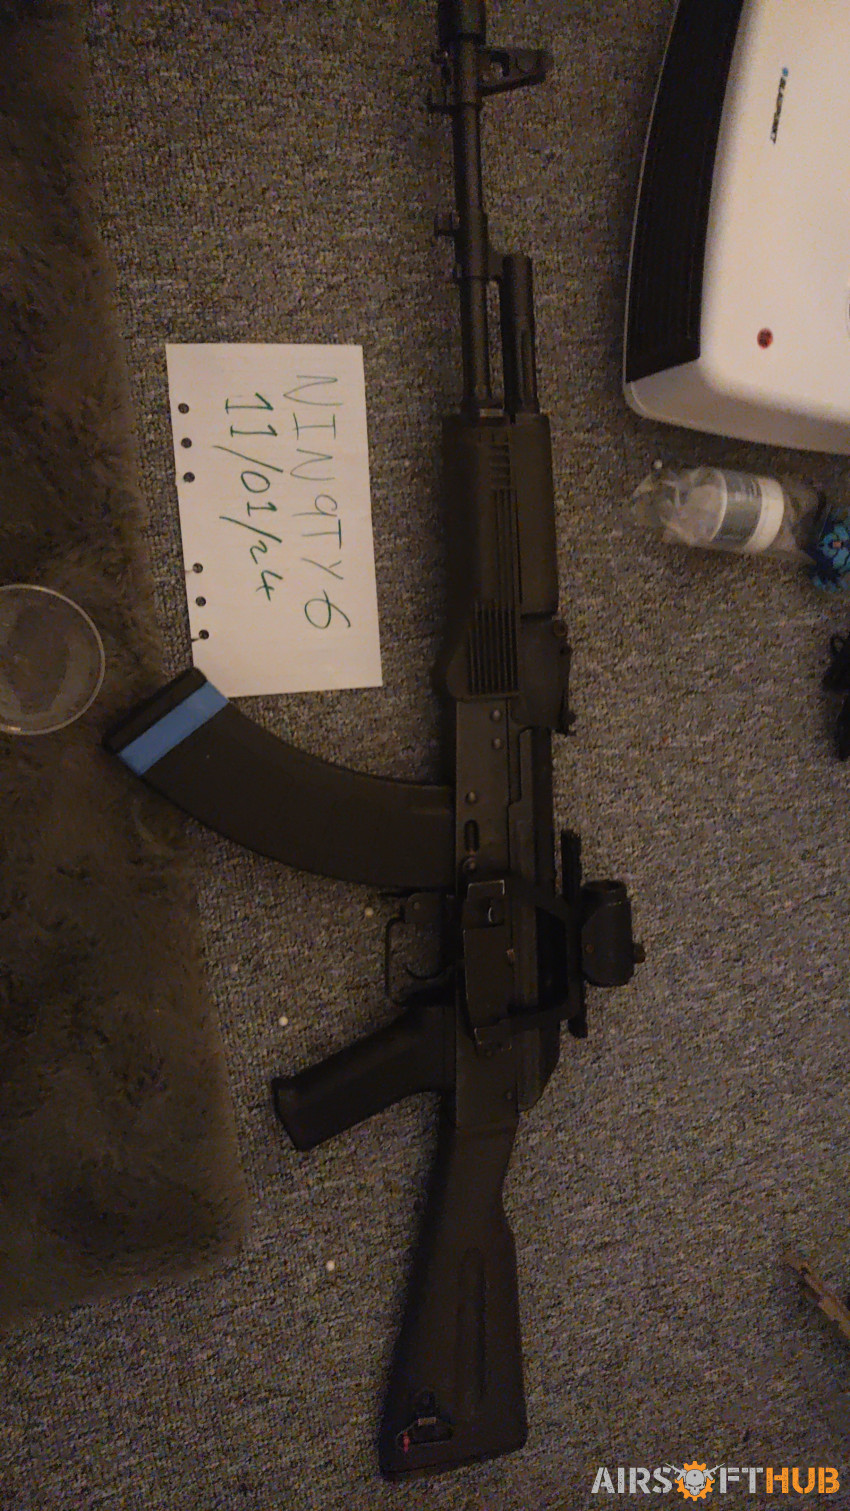 Lct AK74 - Used airsoft equipment